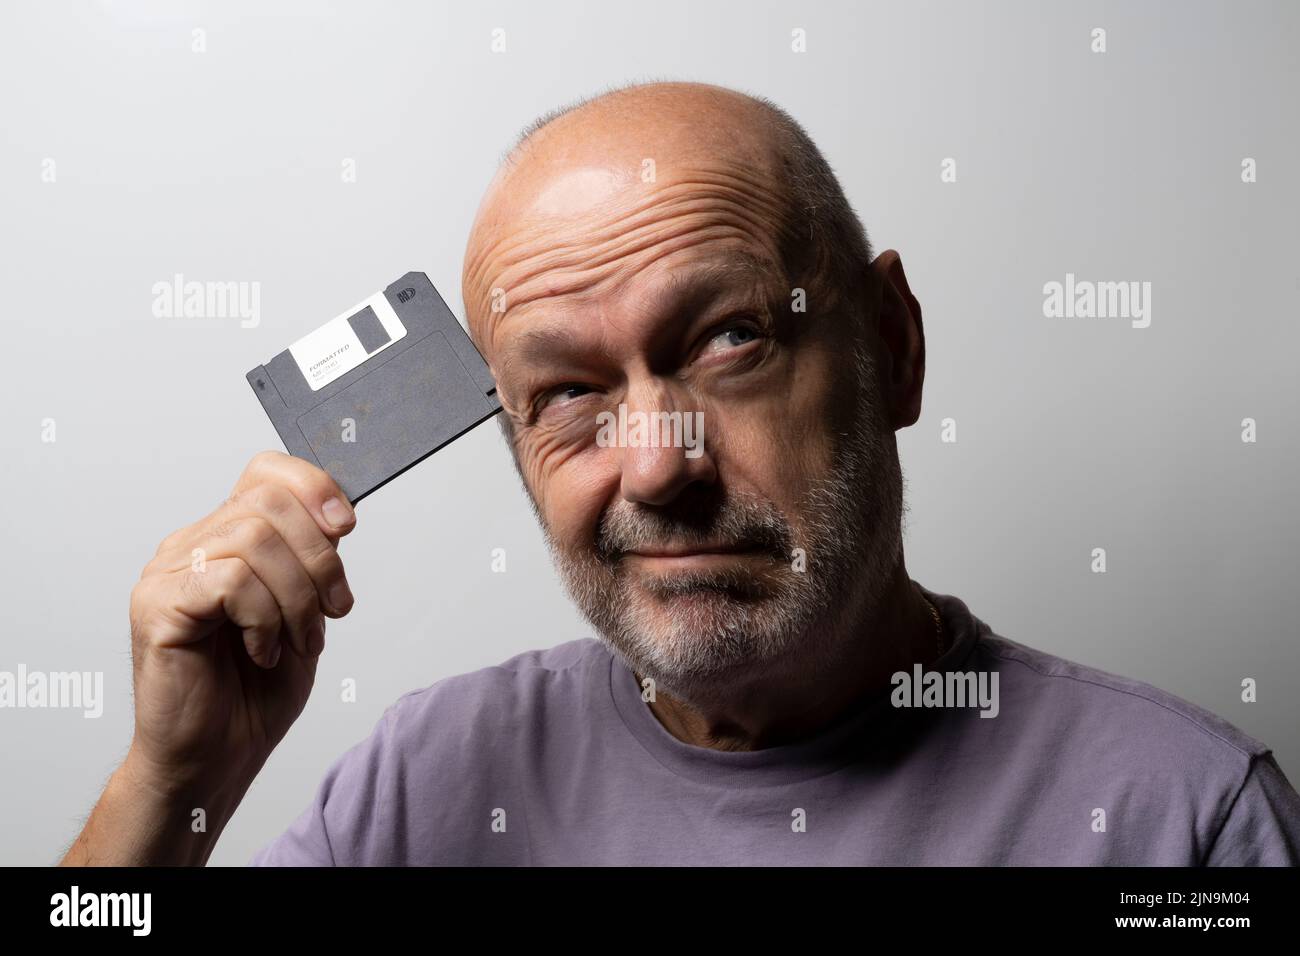 a man with an old floppy disk in his hand Stock Photo